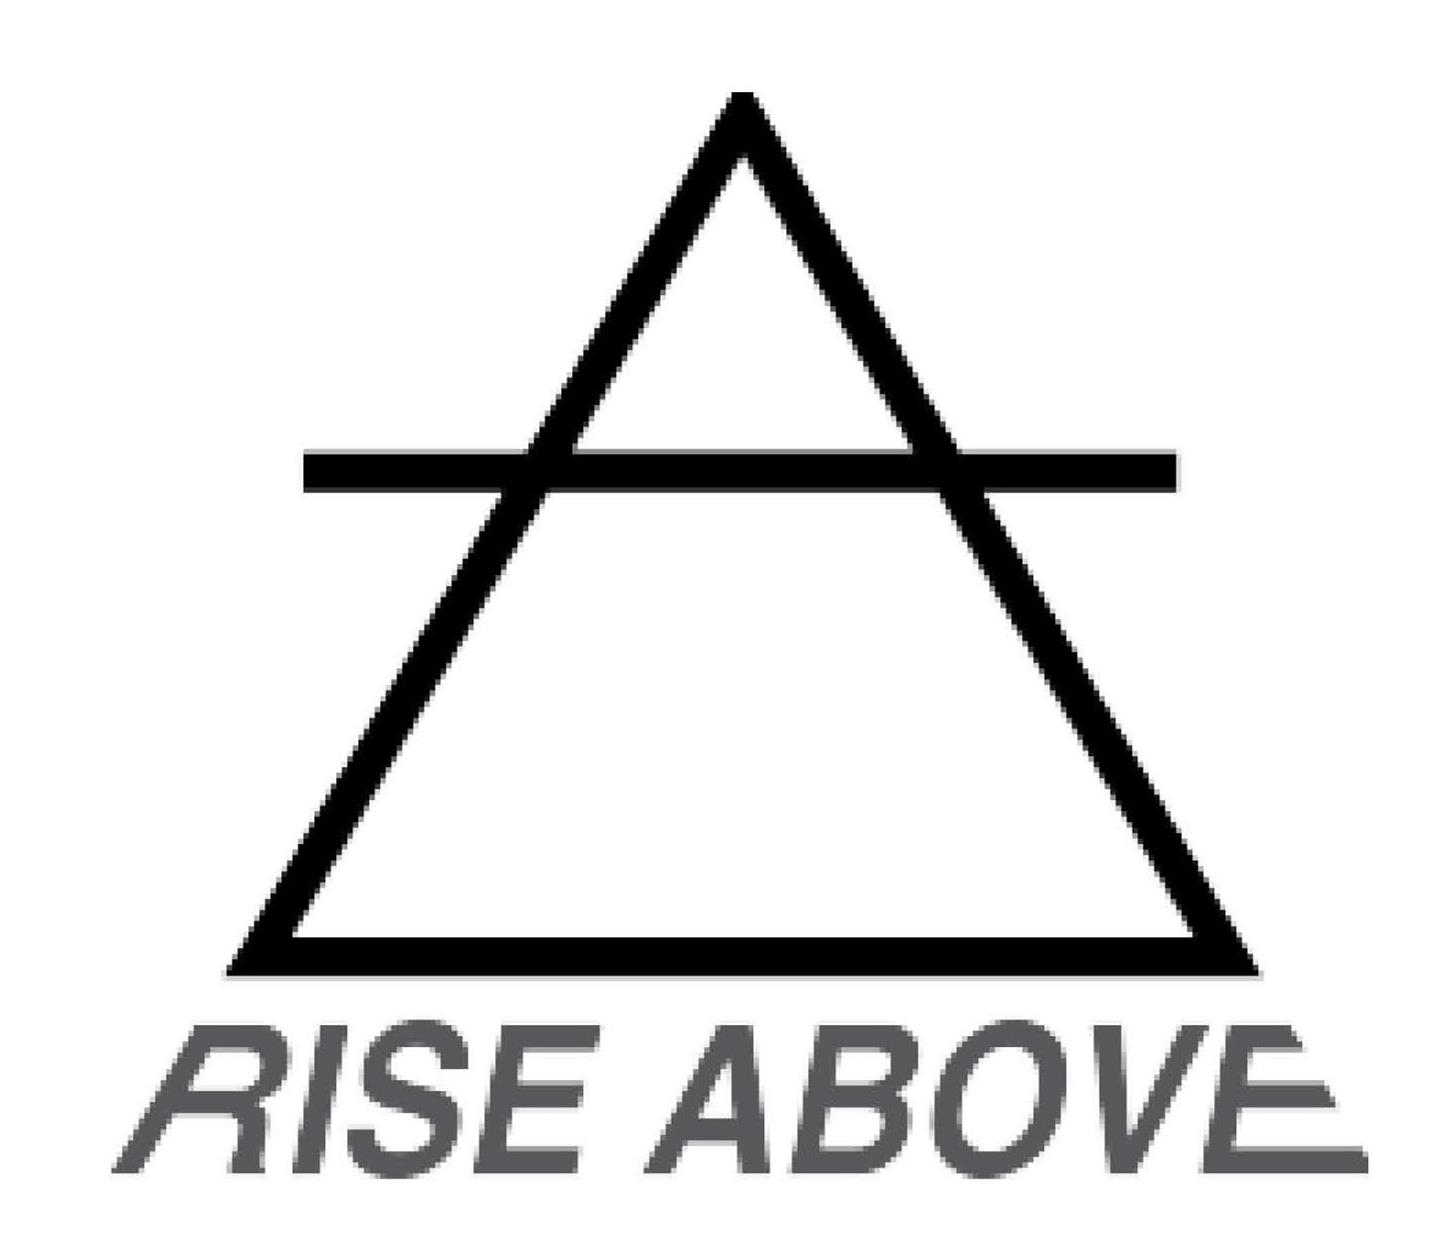 RISE ABOVE